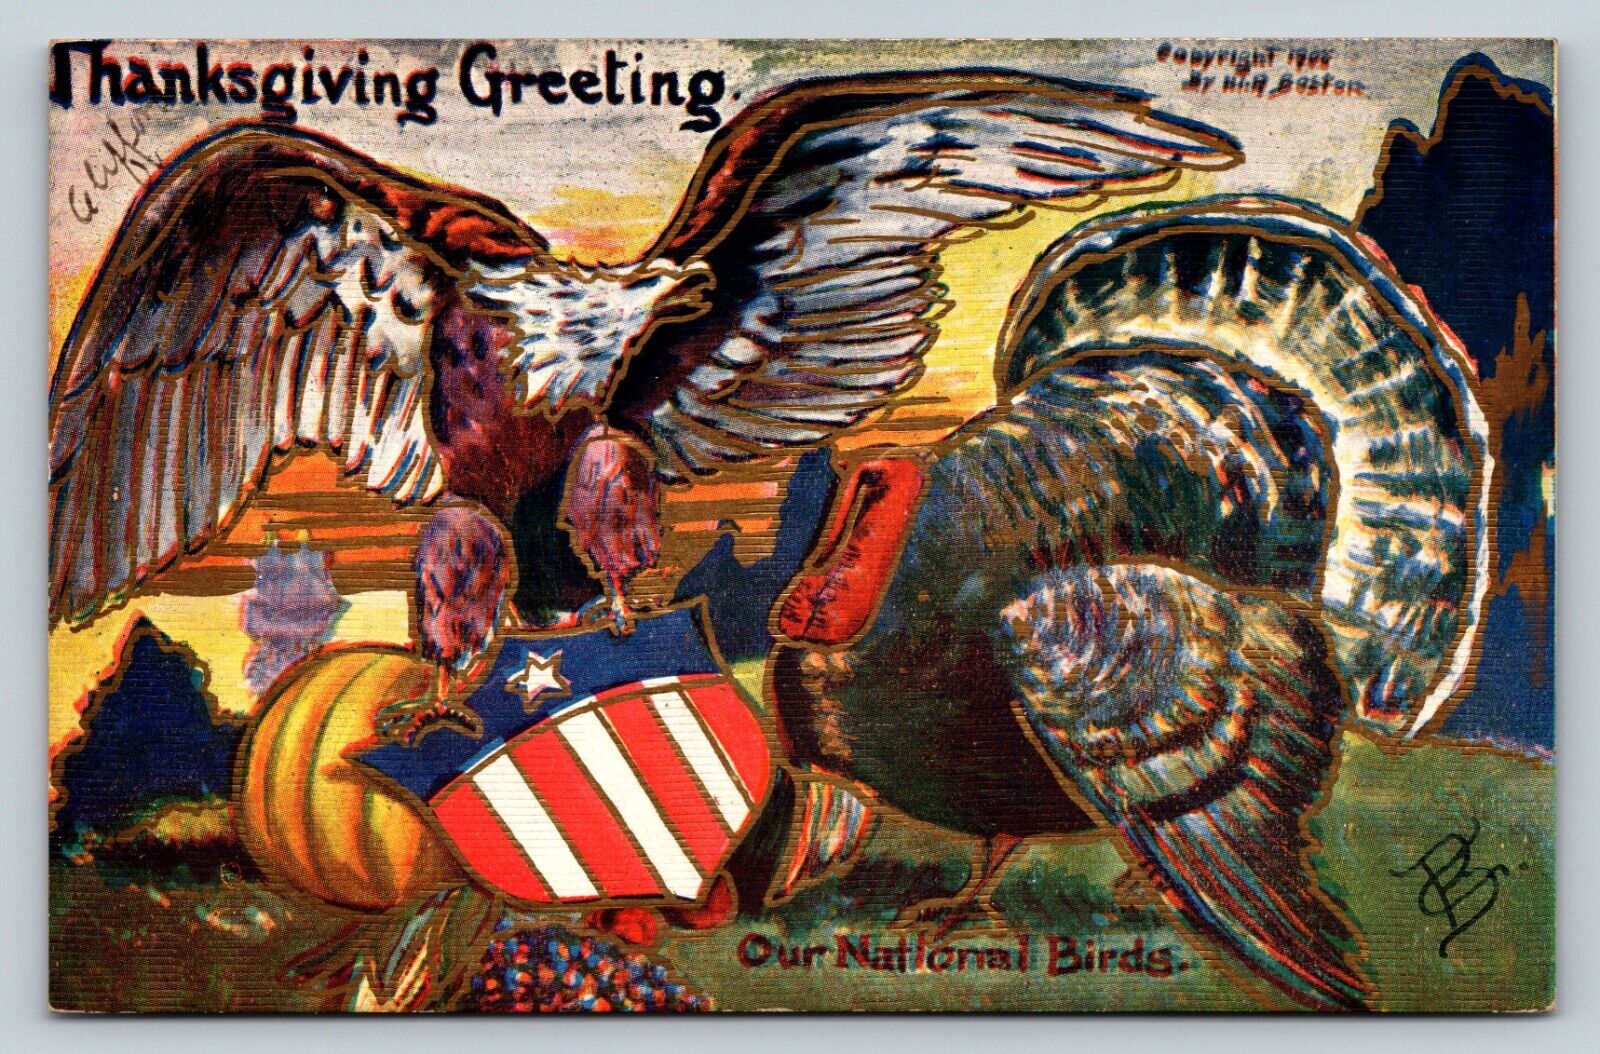 c1908 Thanksgiving Greeting Our National Birds US Shield ANTIQUE Postcard